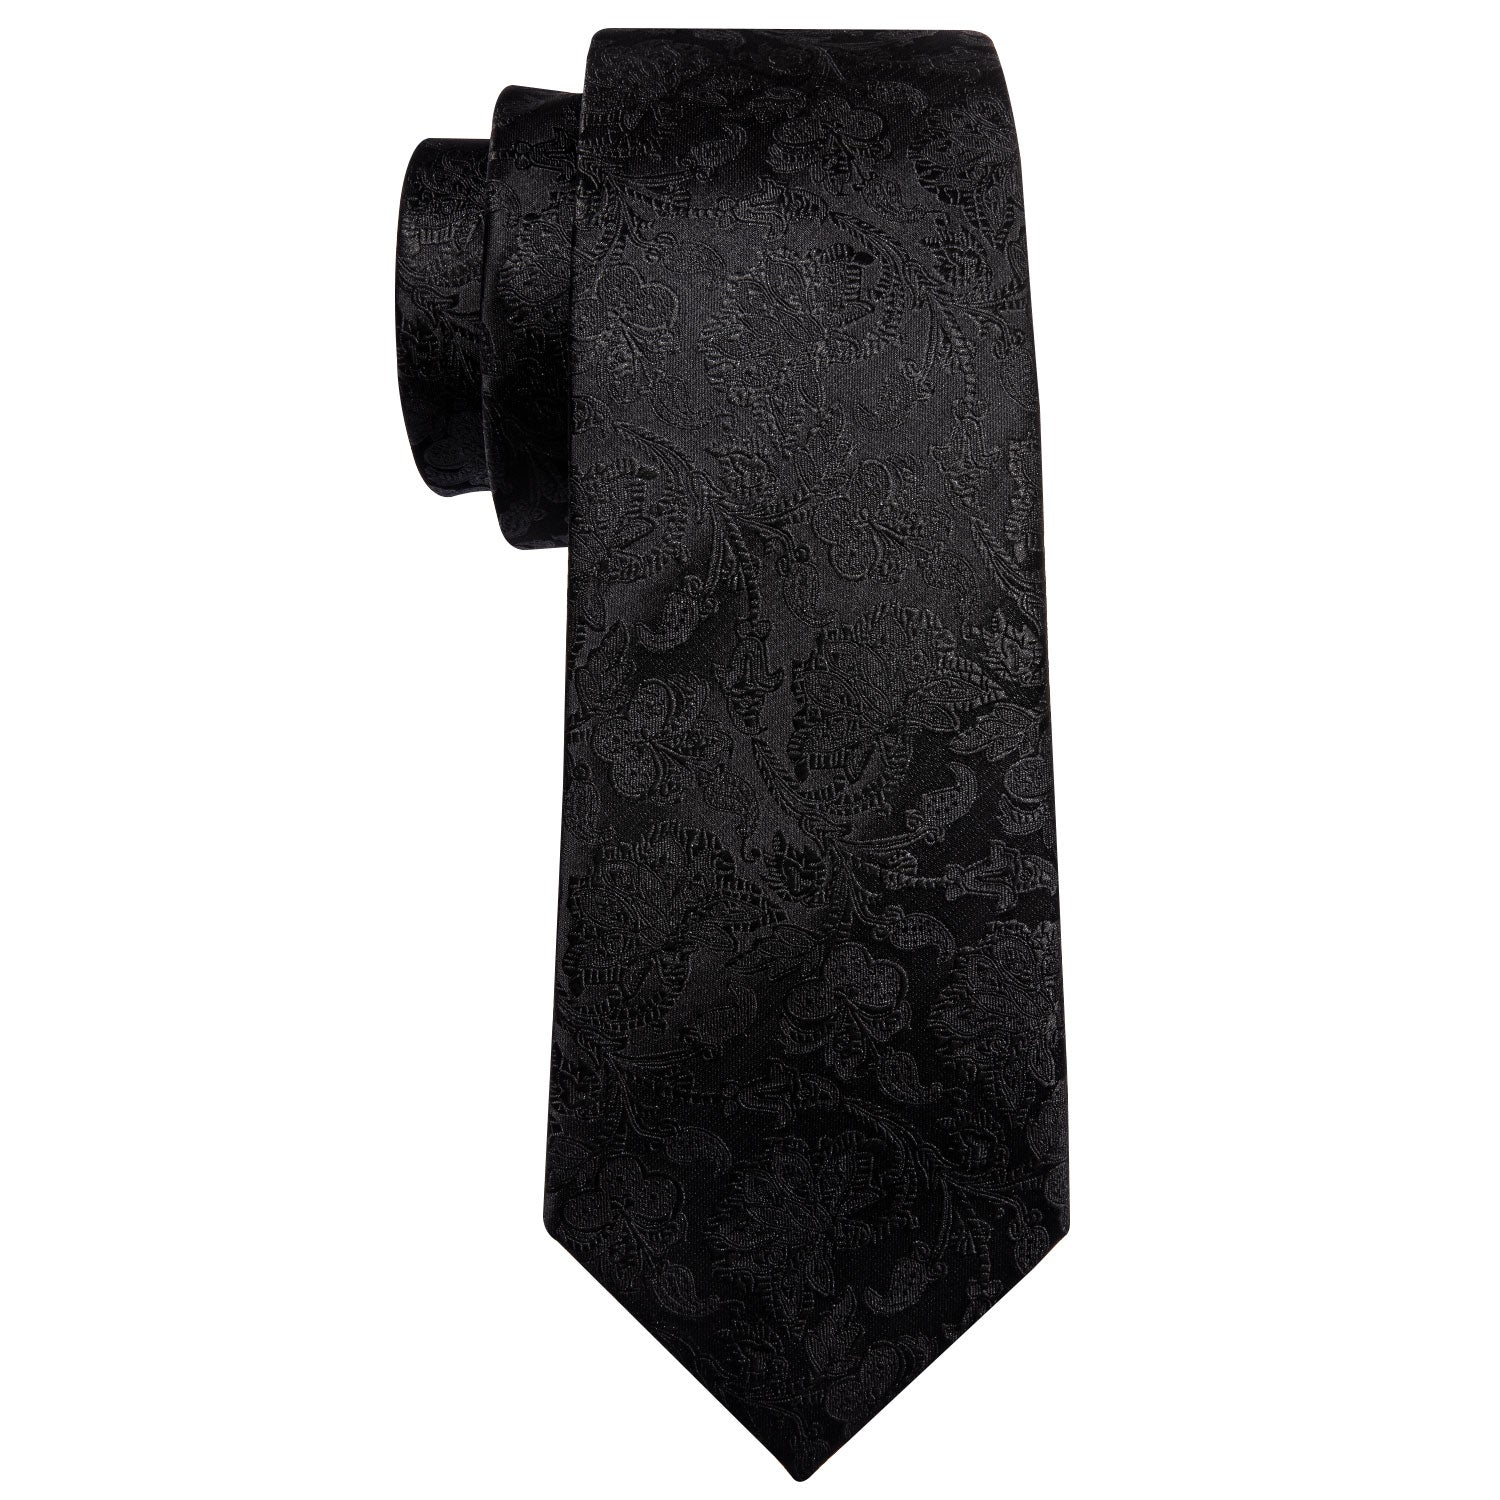 Black Paisley Men's Tie Alloy Lapel Pin Brooch Silk 63 Inches Tie Pocket Square Cufflinks Set Wedding Business Party